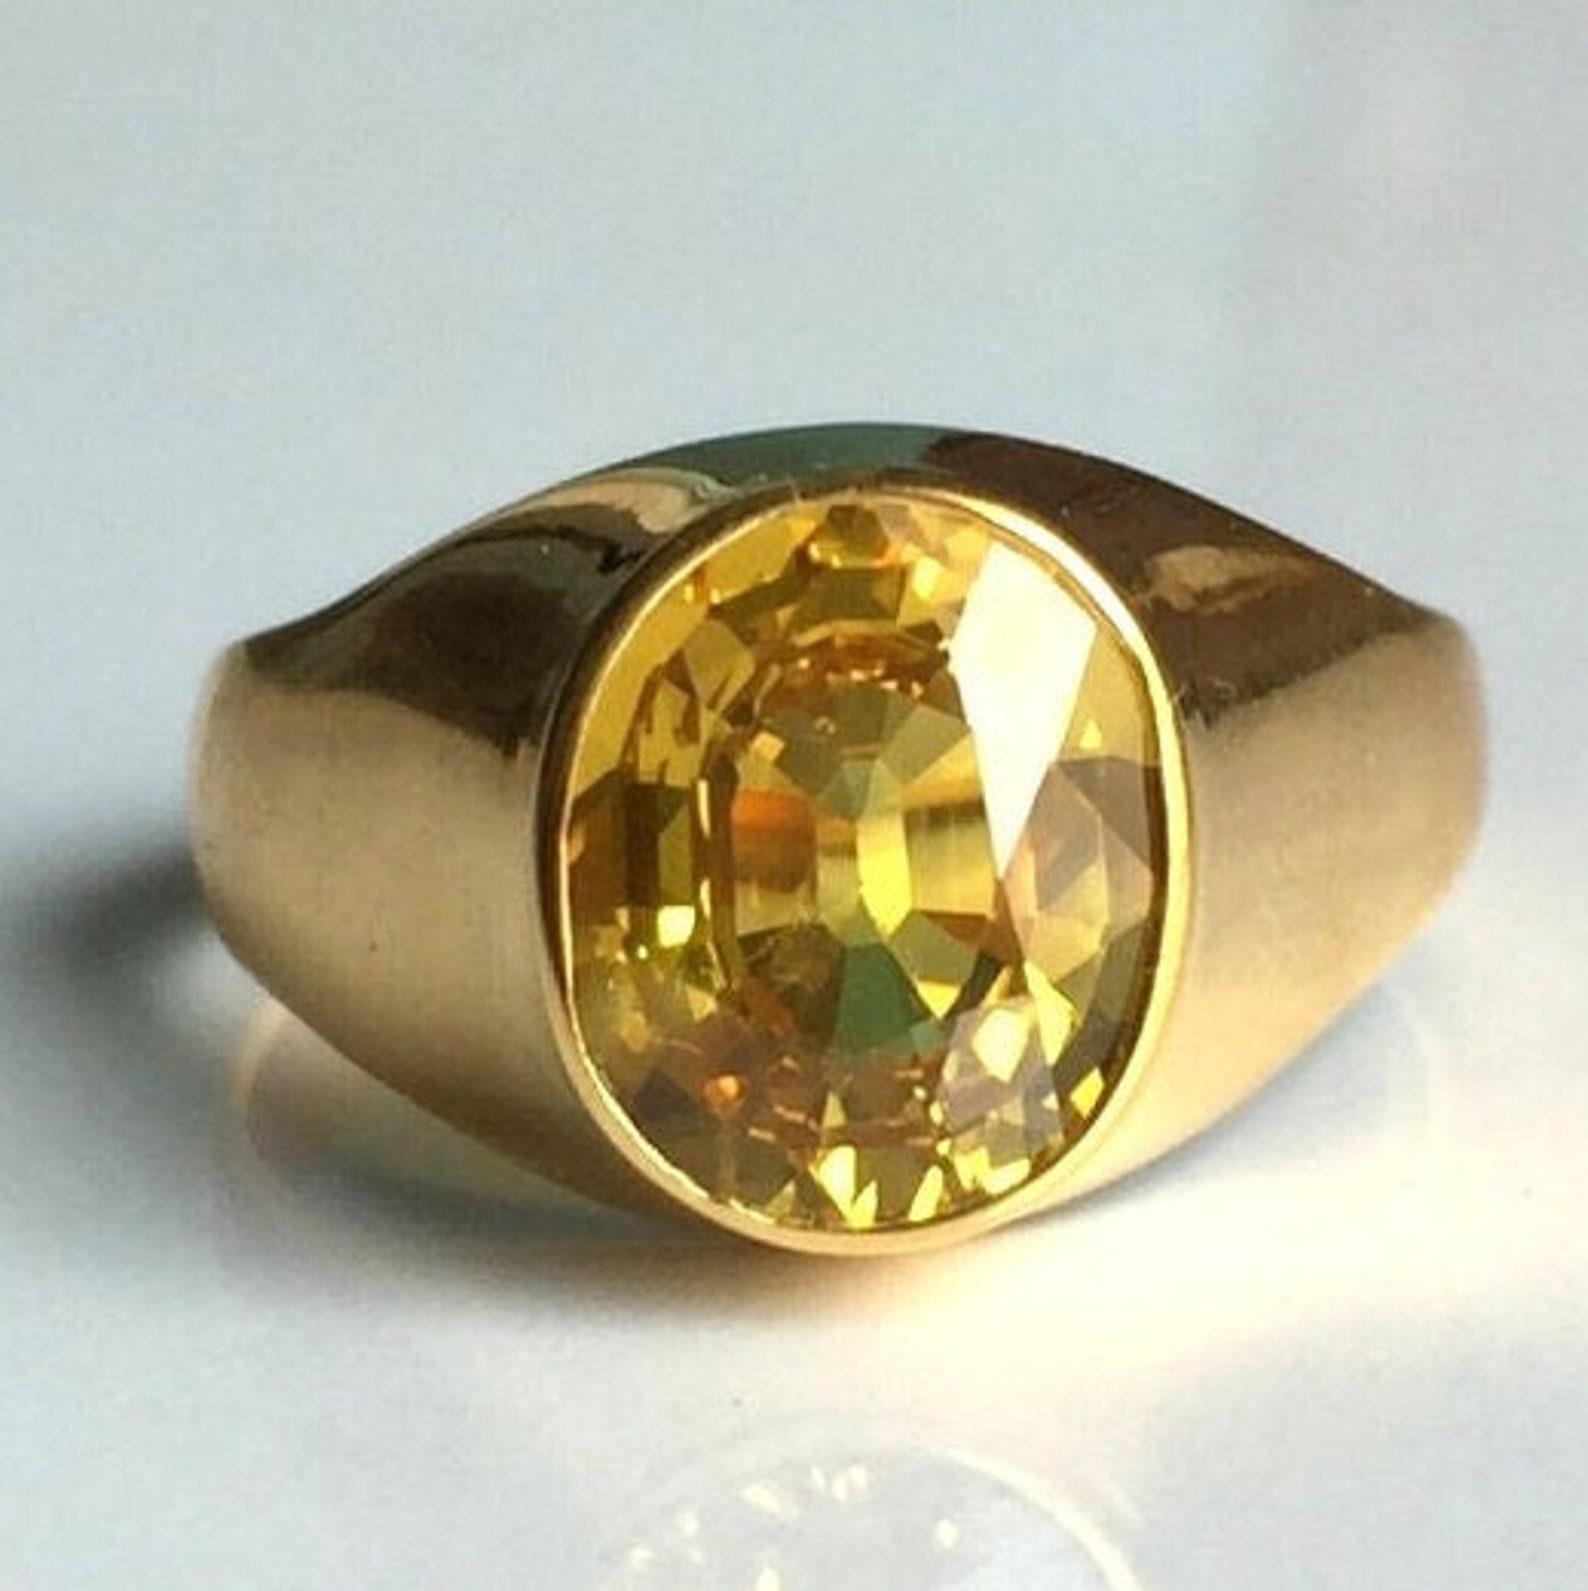 Buy Certified 4.60-7.50 Carat Natural Yellow Sapphire pukhraj Handmade Ring  in Alloy panchdhatu Metal With Gold Finish Online in India - Etsy